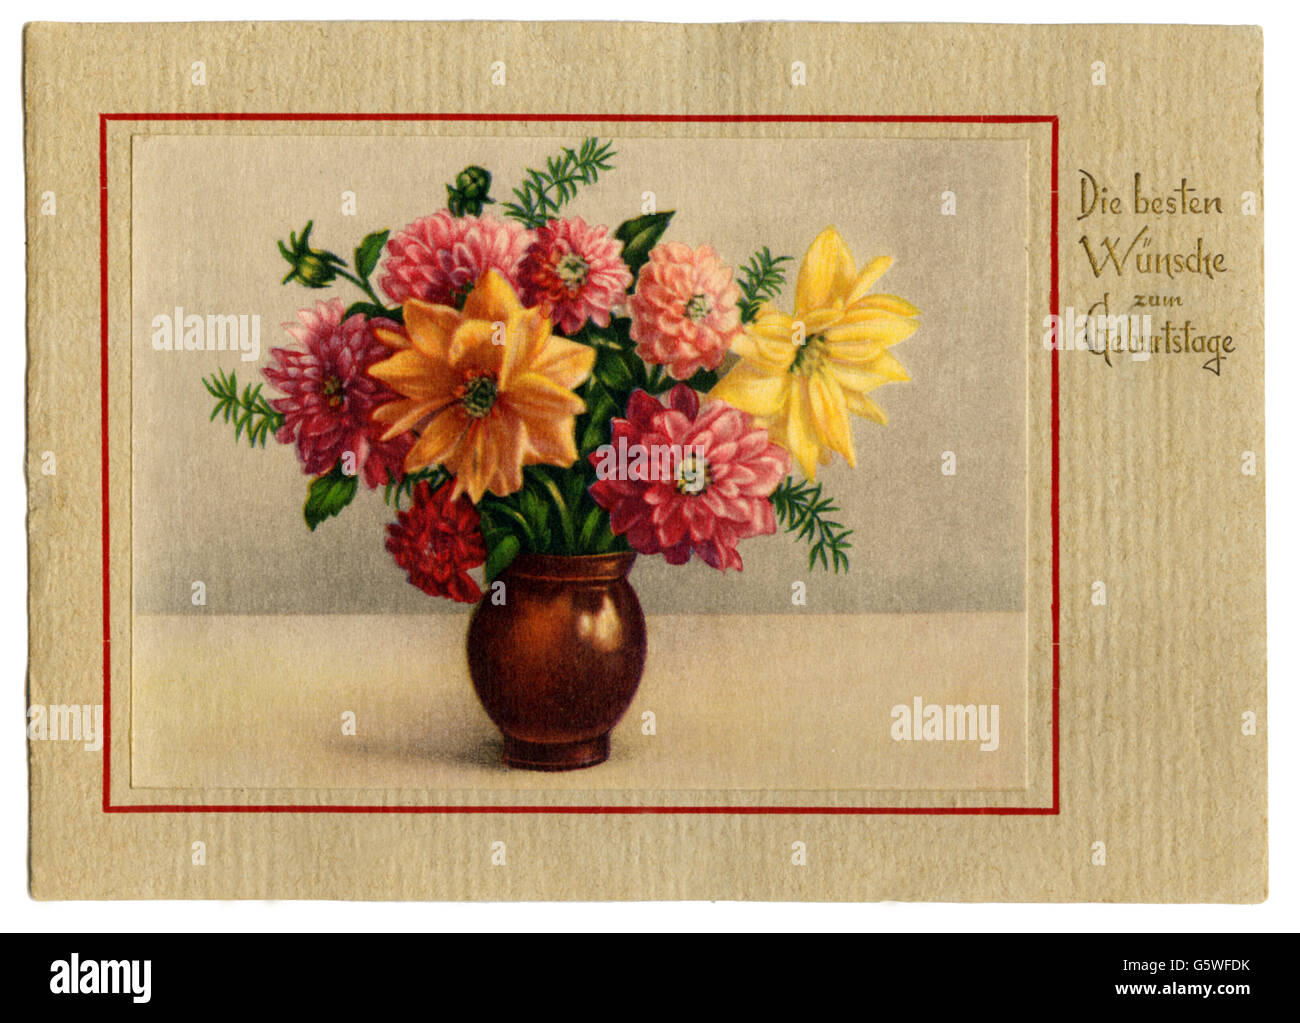 festivities, greetings card birthday, 'Die besten Wünsche zum Geburtstage' (Best wishes for your birthday), carnations in vase, postcard, Germany, 1930s, Additional-Rights-Clearences-Not Available Stock Photo